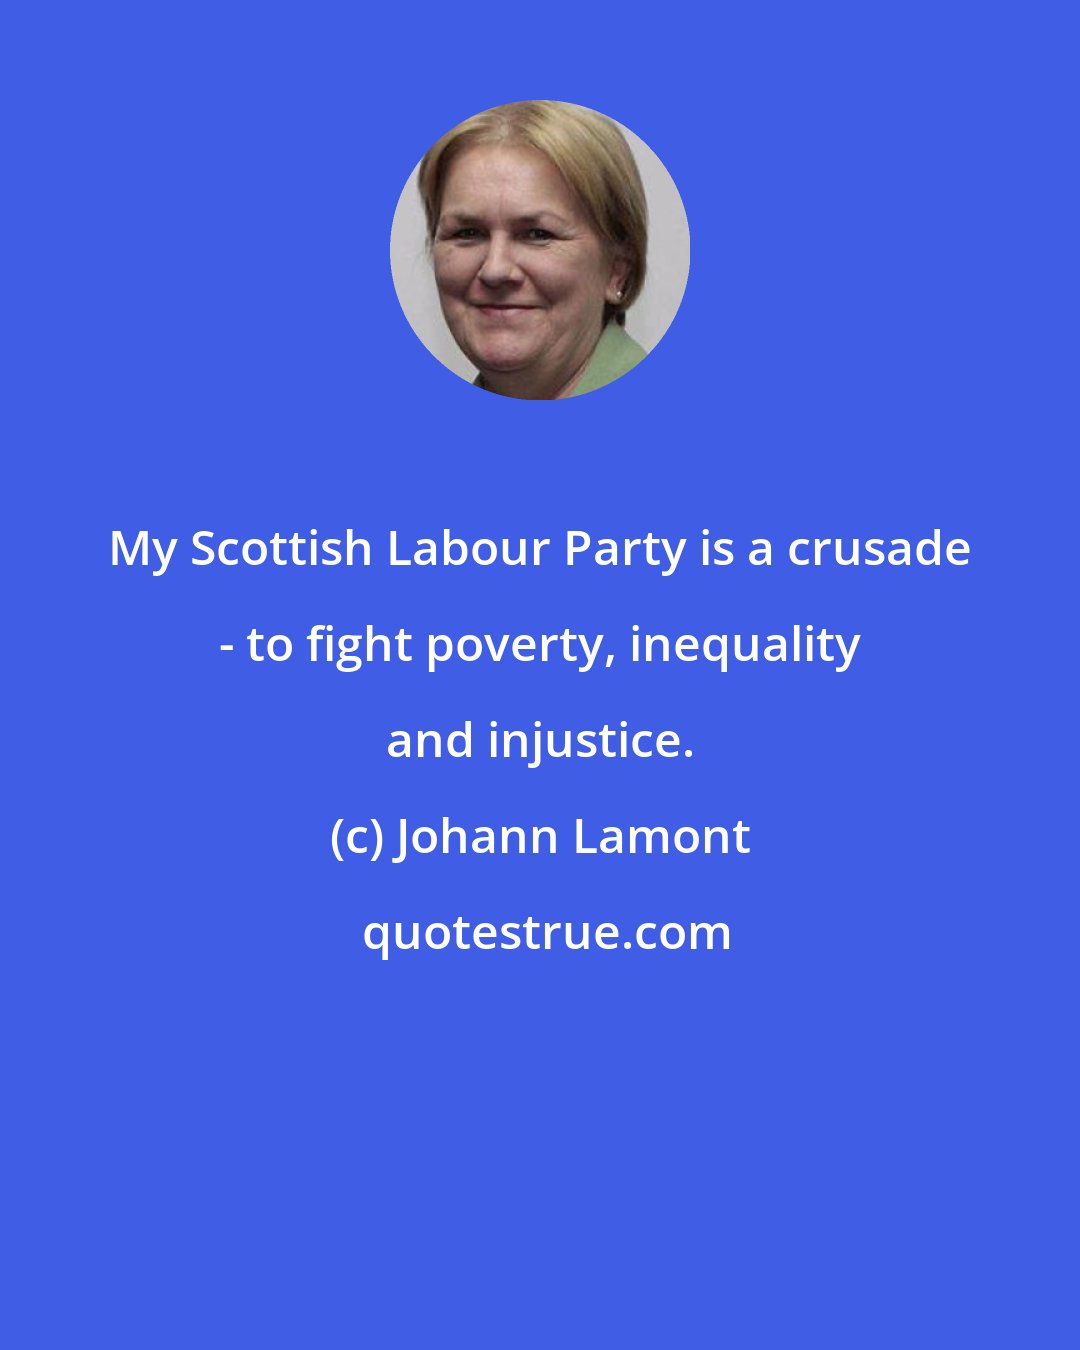 Johann Lamont: My Scottish Labour Party is a crusade - to fight poverty, inequality and injustice.